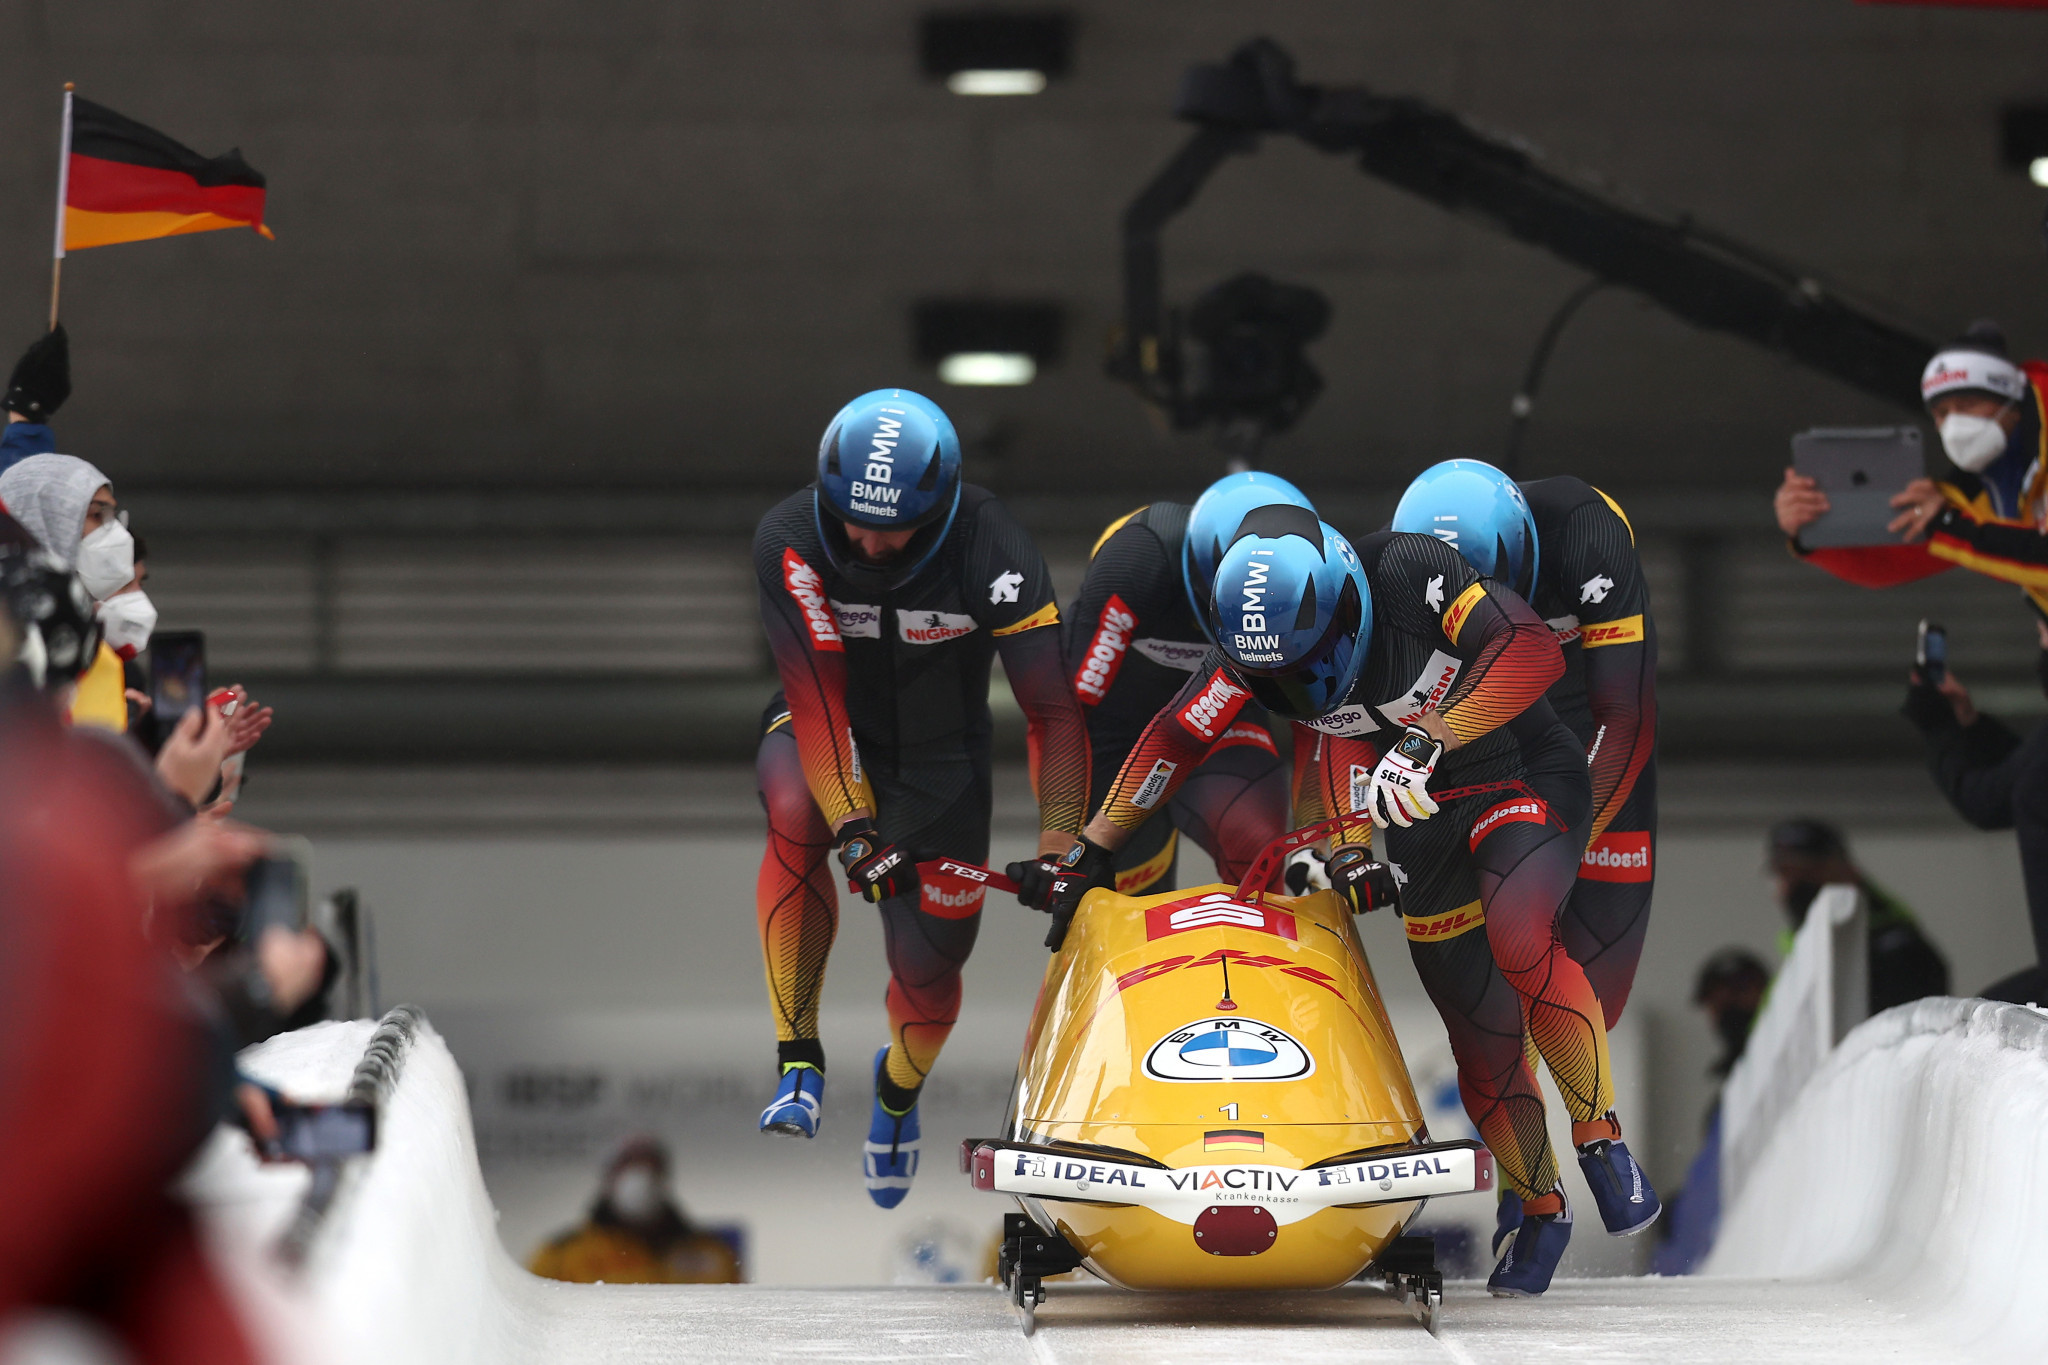 Germany dominates at IBSF Bobsleigh World Cup in Winterberg